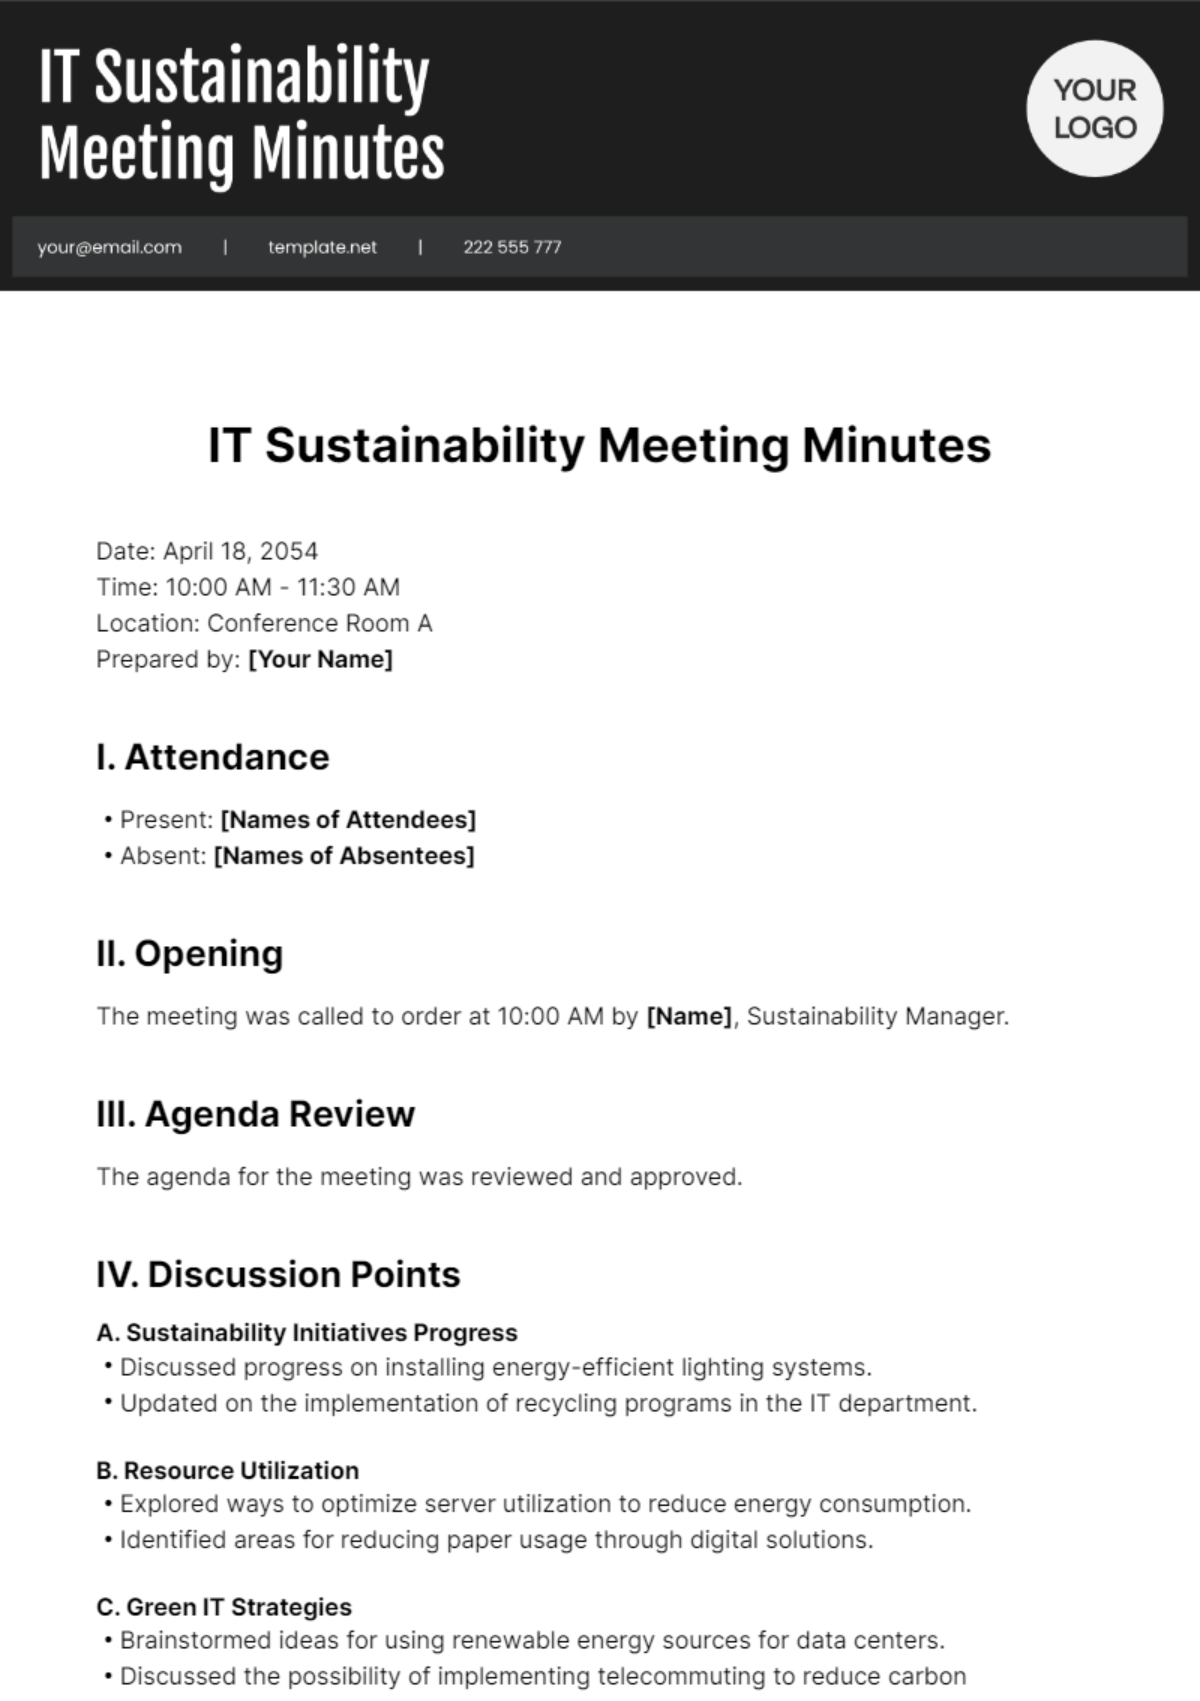 IT Sustainability Meeting Minutes Template